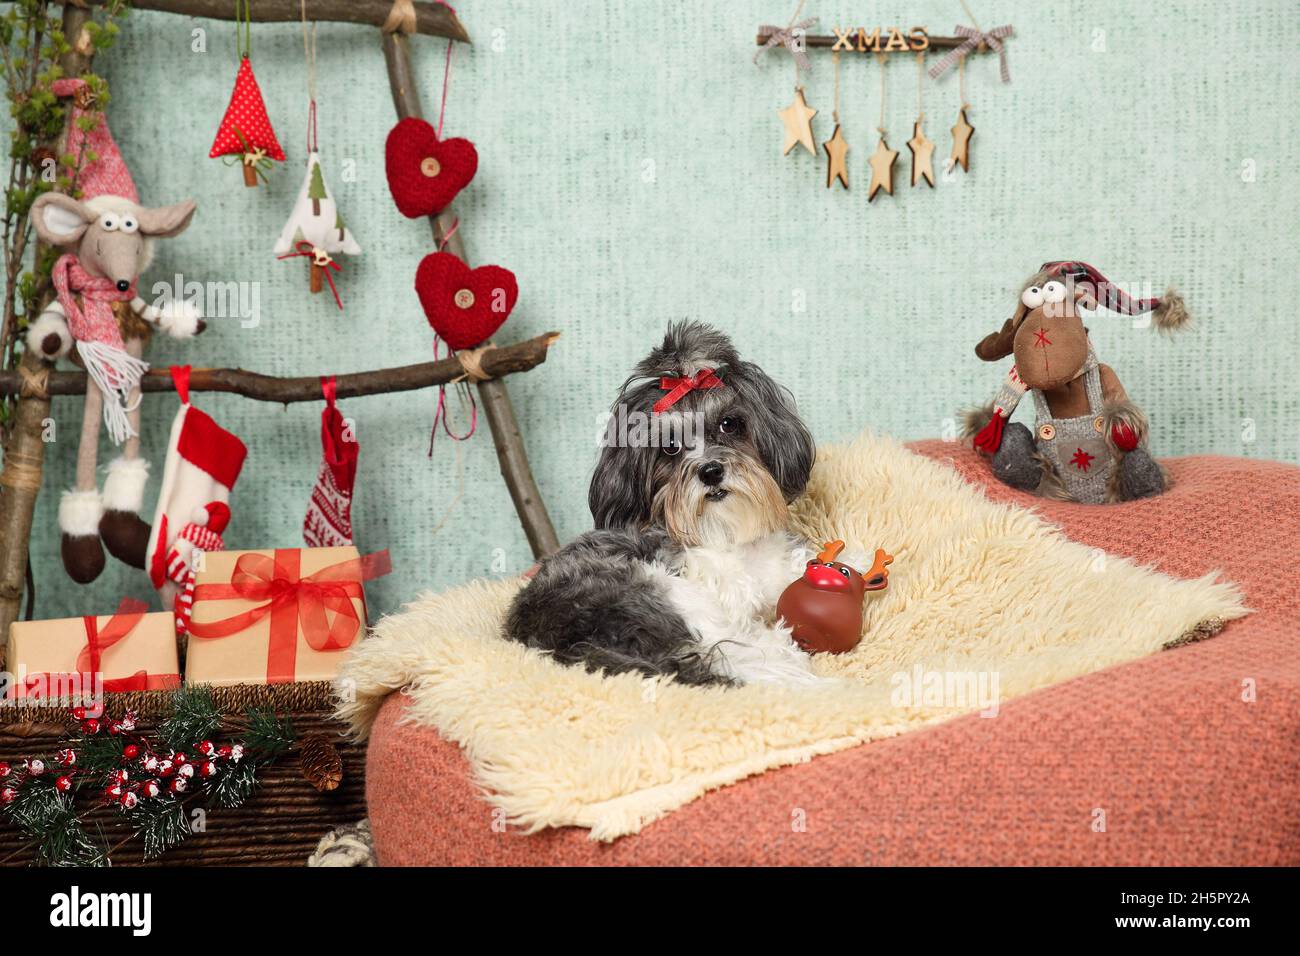 https://c8.alamy.com/comp/2H5PY2A/adorable-bichon-havanese-dog-with-red-ribbon-bow-lying-on-a-cosy-pouf-chair-with-rug-cover-in-a-christmas-decorated-home-with-wooden-ladder-like-chris-2H5PY2A.jpg